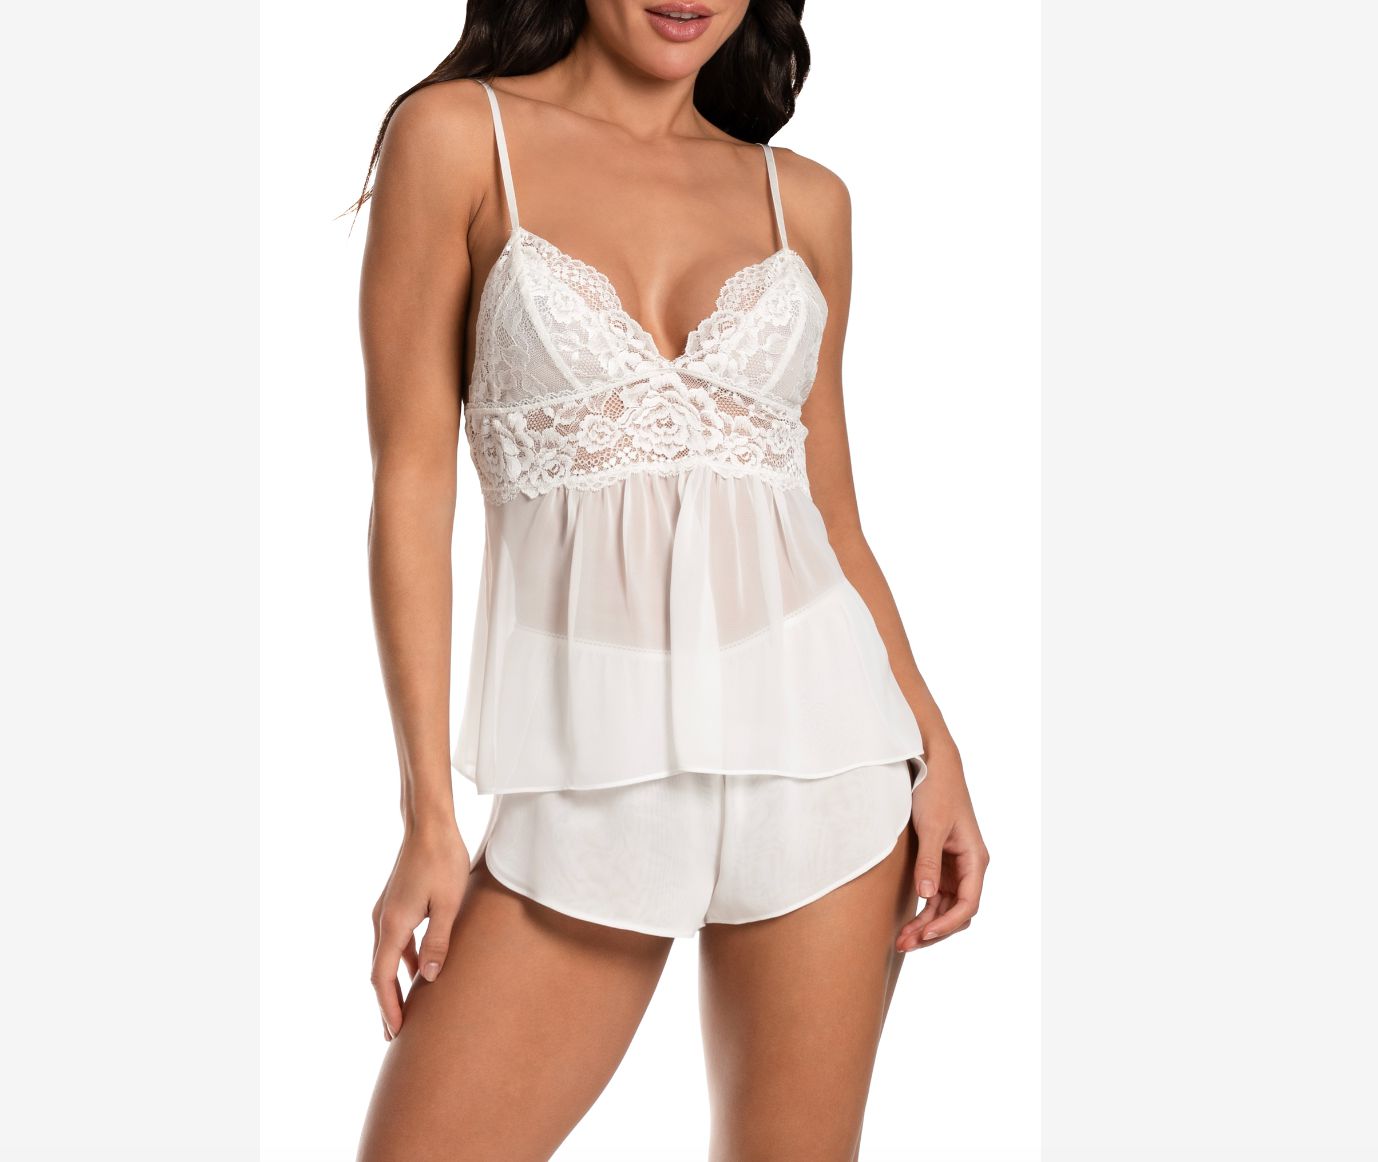 Jonquil Juliet Cami Short Set JUE040 in Ivory-Loungewear-Jonquil in Bloom-Ivory-XSmall-Anna Bella Fine Lingerie, Reveal Your Most Gorgeous Self!